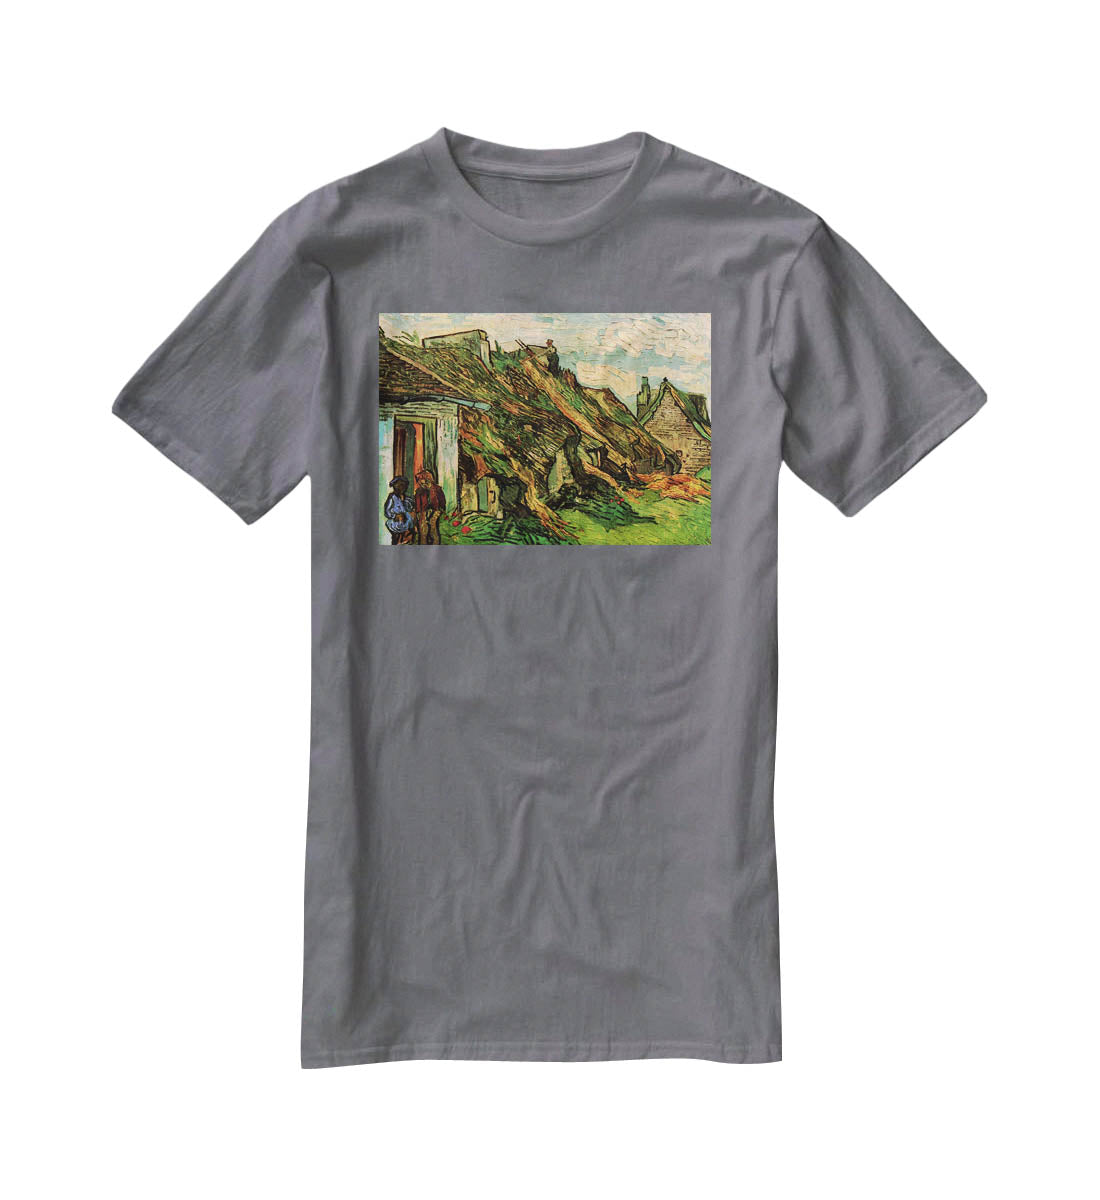 Thatched Sandstone Cottages in Chaponval by Van Gogh T-Shirt - Canvas Art Rocks - 3